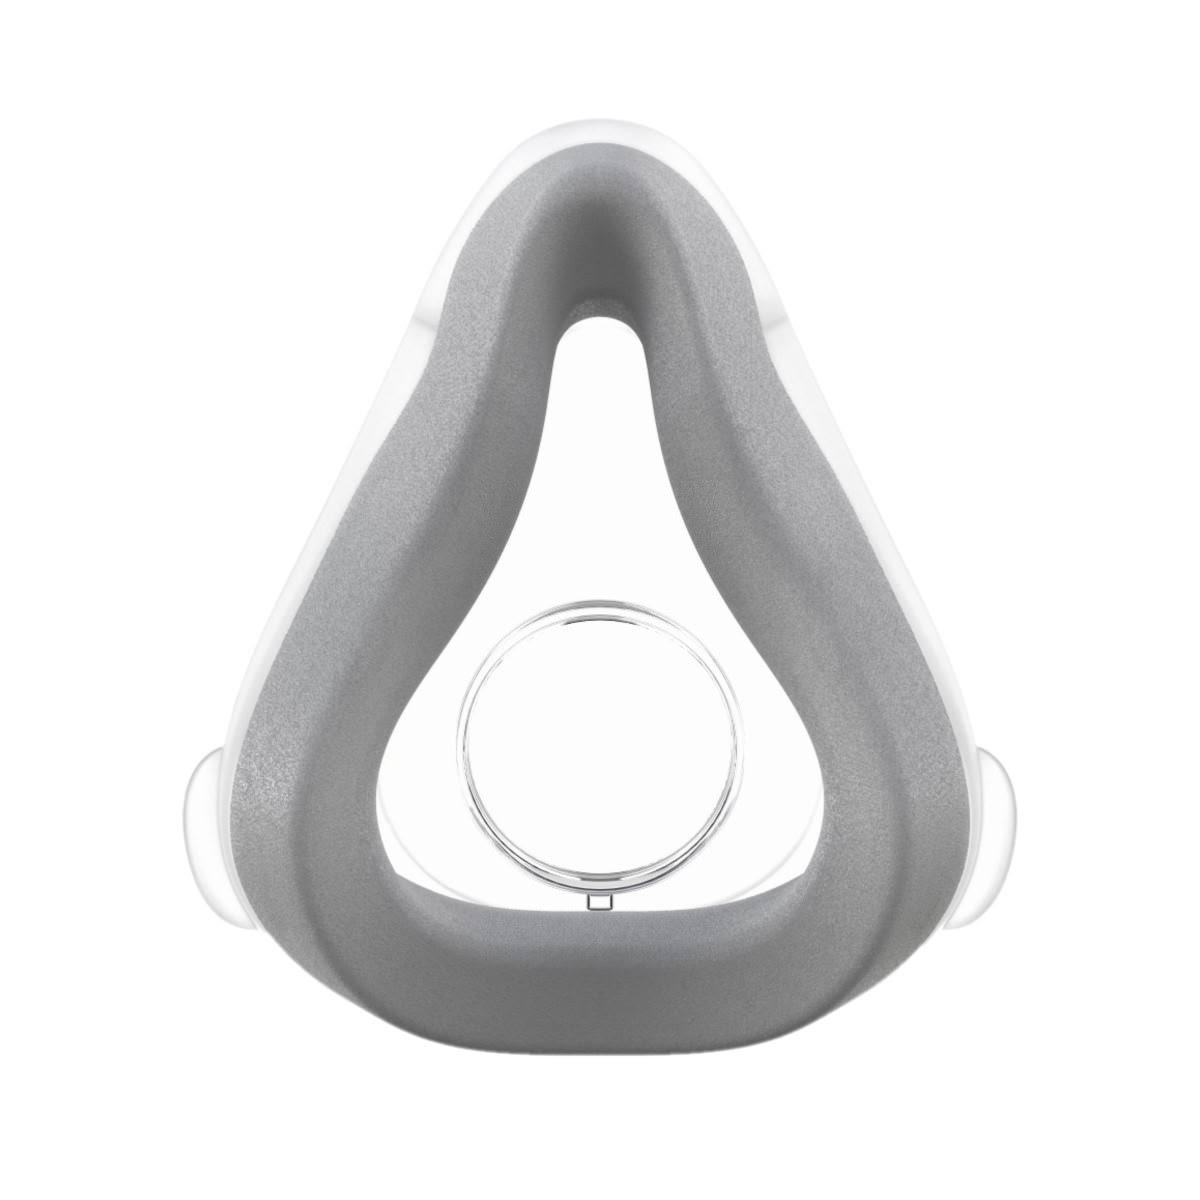 ResMed AirTouch F20 Cushion (Large)